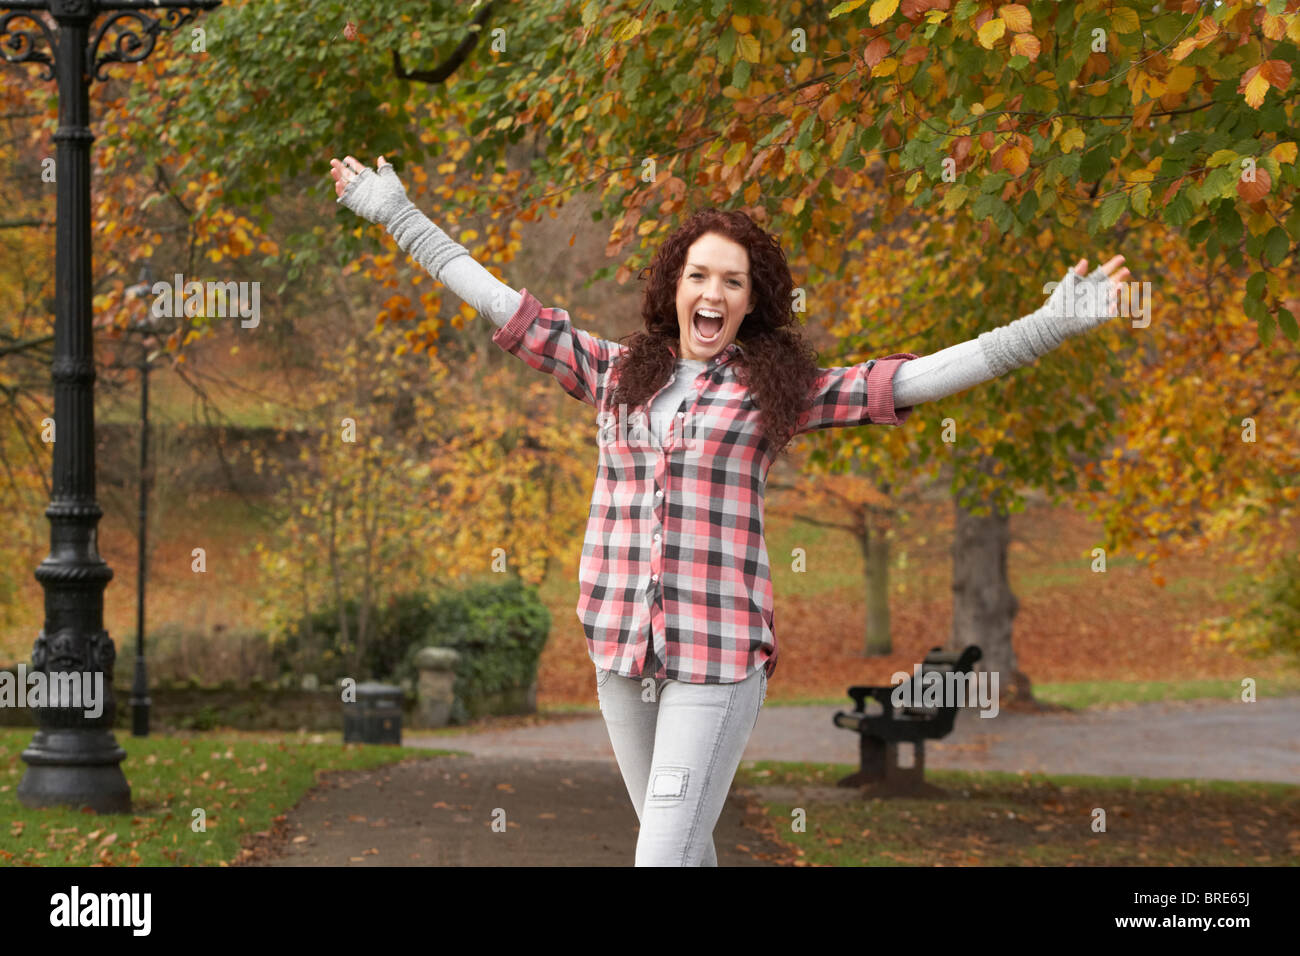 Teenage Girl Standing In Autumn Park With Arms Outstretched Stock Photo